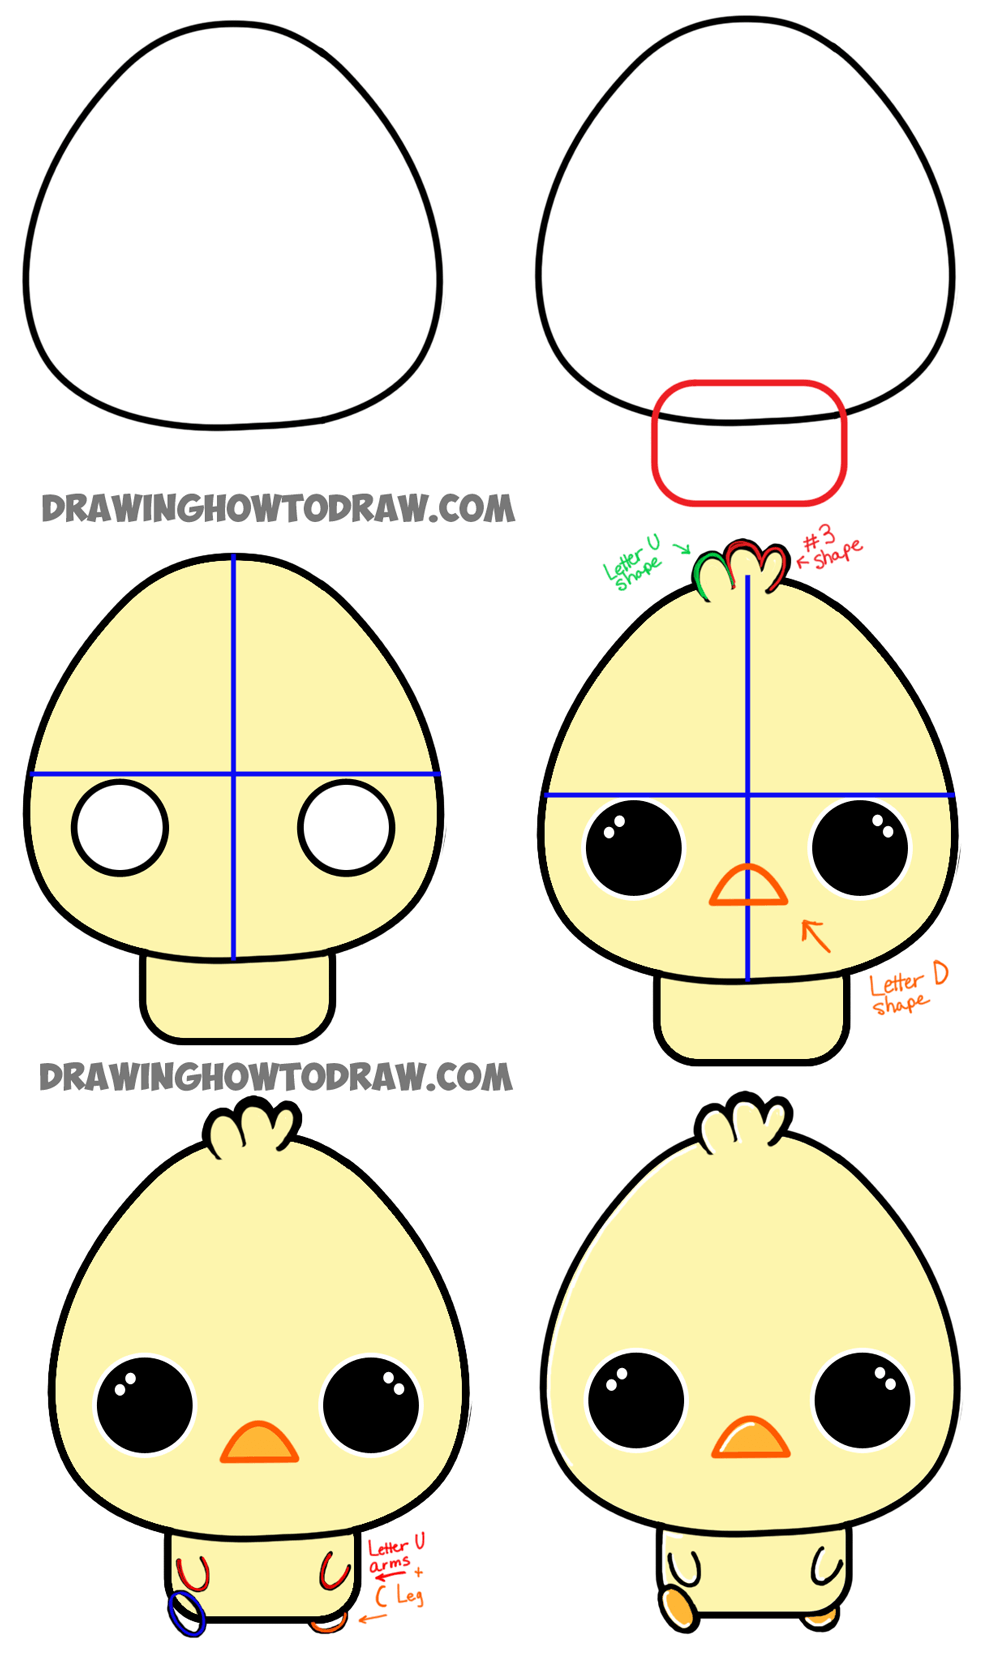 How to Draw a Cartoon Chibi Baby Chick Easy Tutorial for Kids How